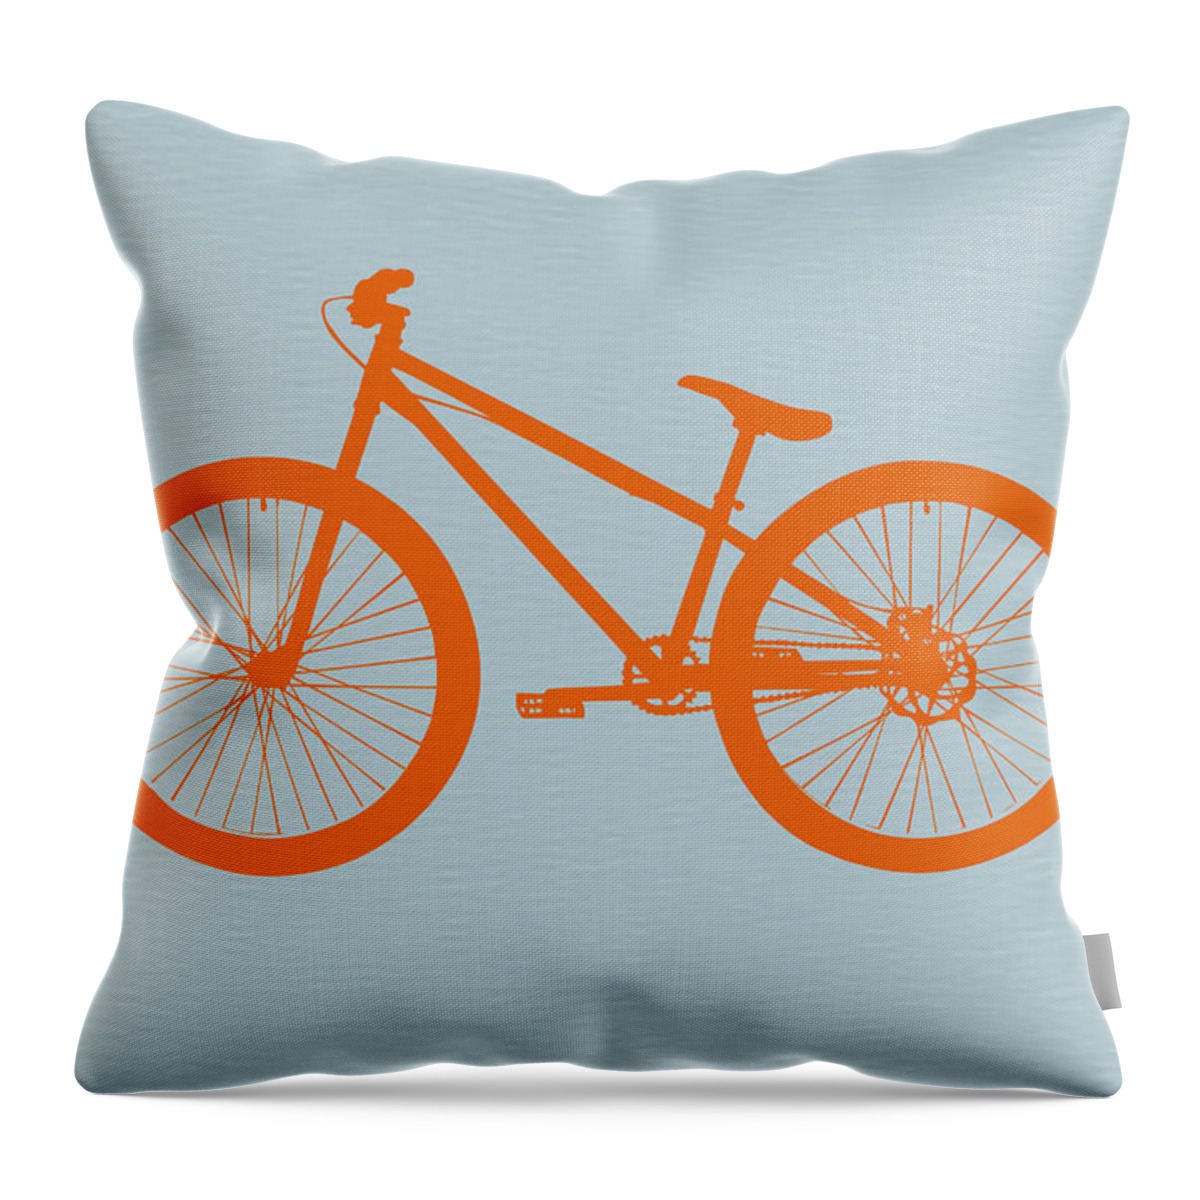 Bicycle Throw Pillow featuring the digital art Orange Bicycle by Naxart Studio